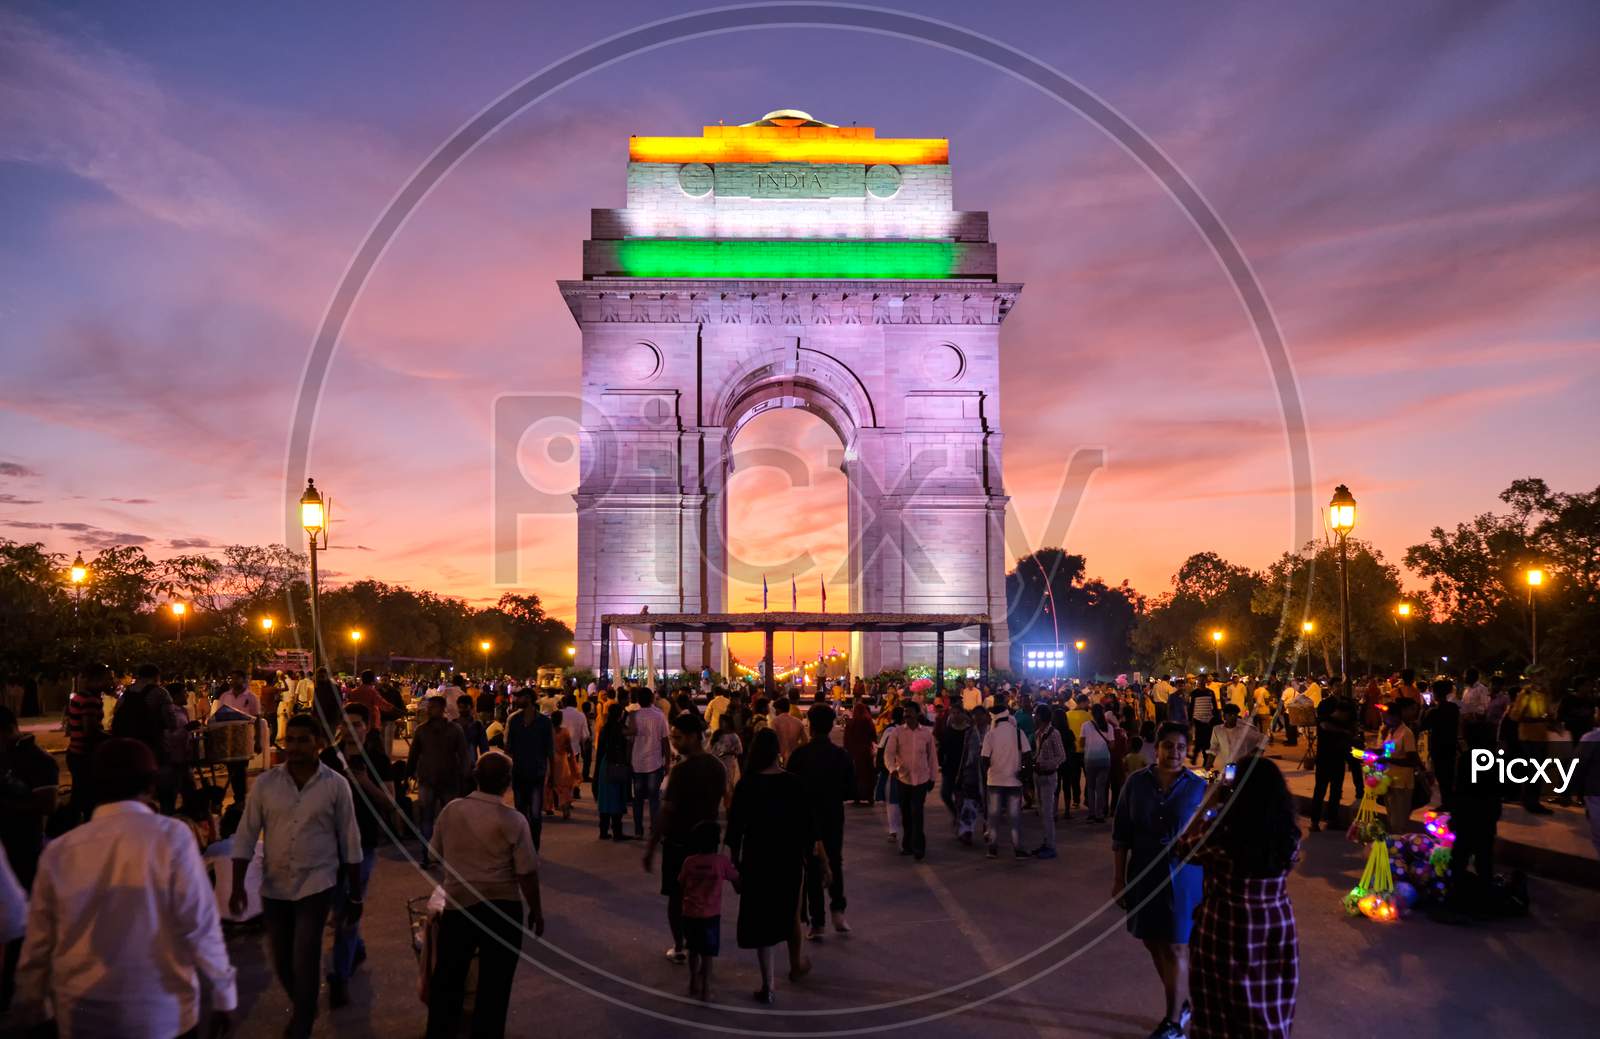 Tourists Visit The Illuminated India Gate War Memorial During Colorful Sunset, New Delhi, India